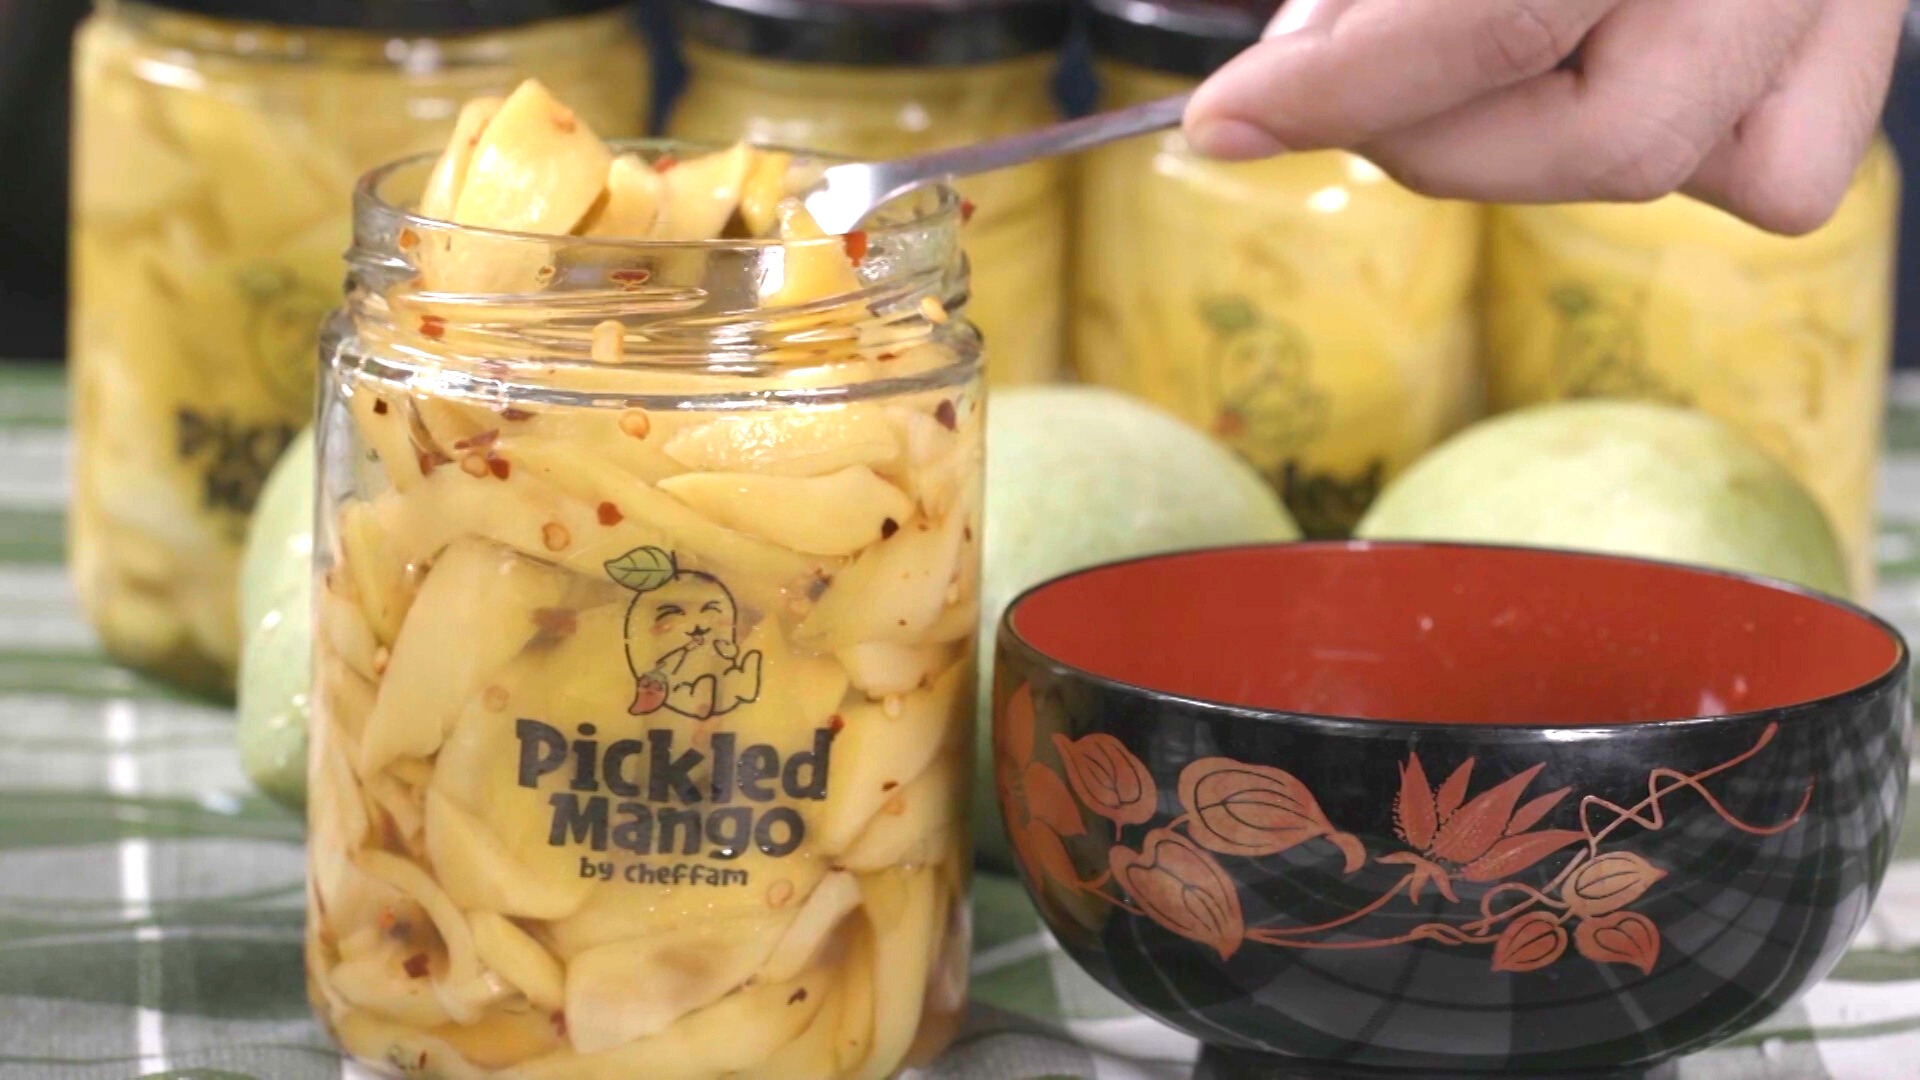 Entrepreneur Shares Pickled Mango Recipe That Could Earn P30K - P50K A Week